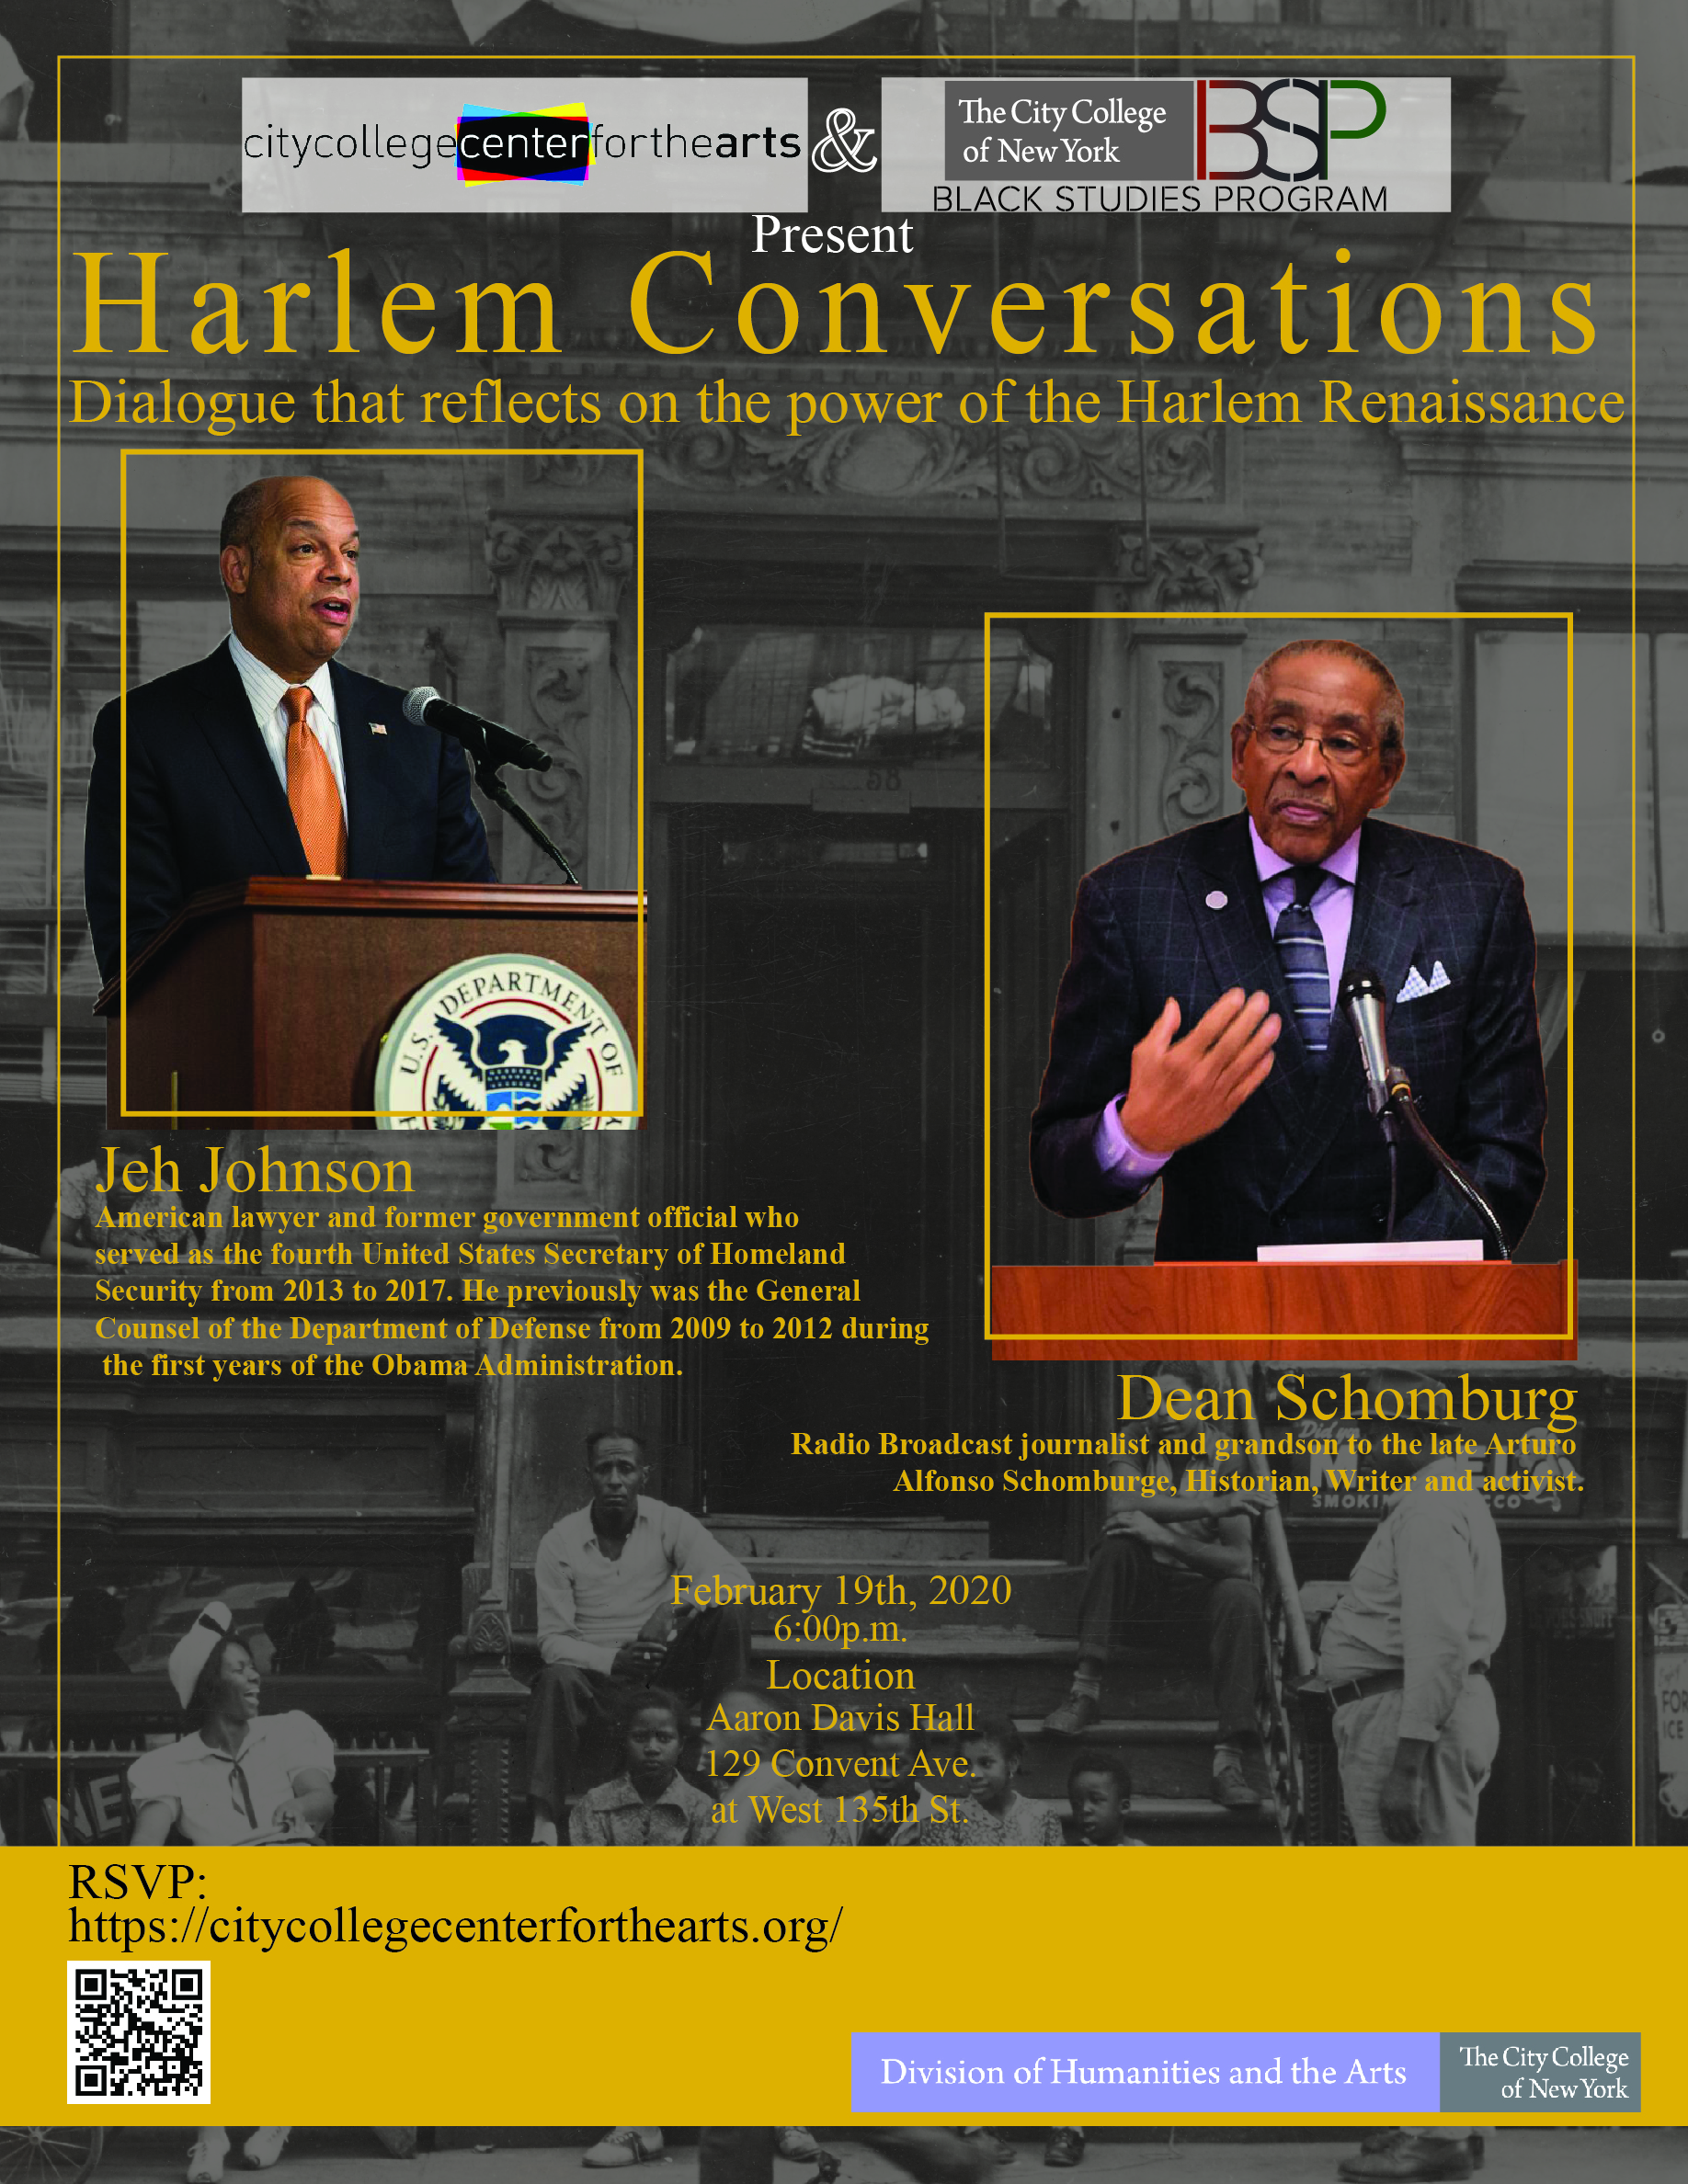 The City College center for the arts & Black Studies Program Present: Harlem Conversations - Dialogue that reflects on the power Harlem Renaissance. Speakers are - Jeb Johnson, American lawyer and former government official who  served as the fourth United States Secretary of Homeland  Security from 2013 to 2017. He previously was the General  Counsel of the Department of Defense from 2009 to 2012 during  the first years of the Obama Administration.. speaker 2 is Dean Schomburg, Radio Broadcast journalist and grandson to the late Arturo  Alfonso Schomburg, Historian, Writer and activist. the lecture is on February 19th, 2020 at 6:00PM At  Aaron Davis Hall 129 Convent Ave. at West 135th St...RSVP at   https://citycollegecenterforthearts.org/  . this event is co sponsored by the Humanities and the arts. 